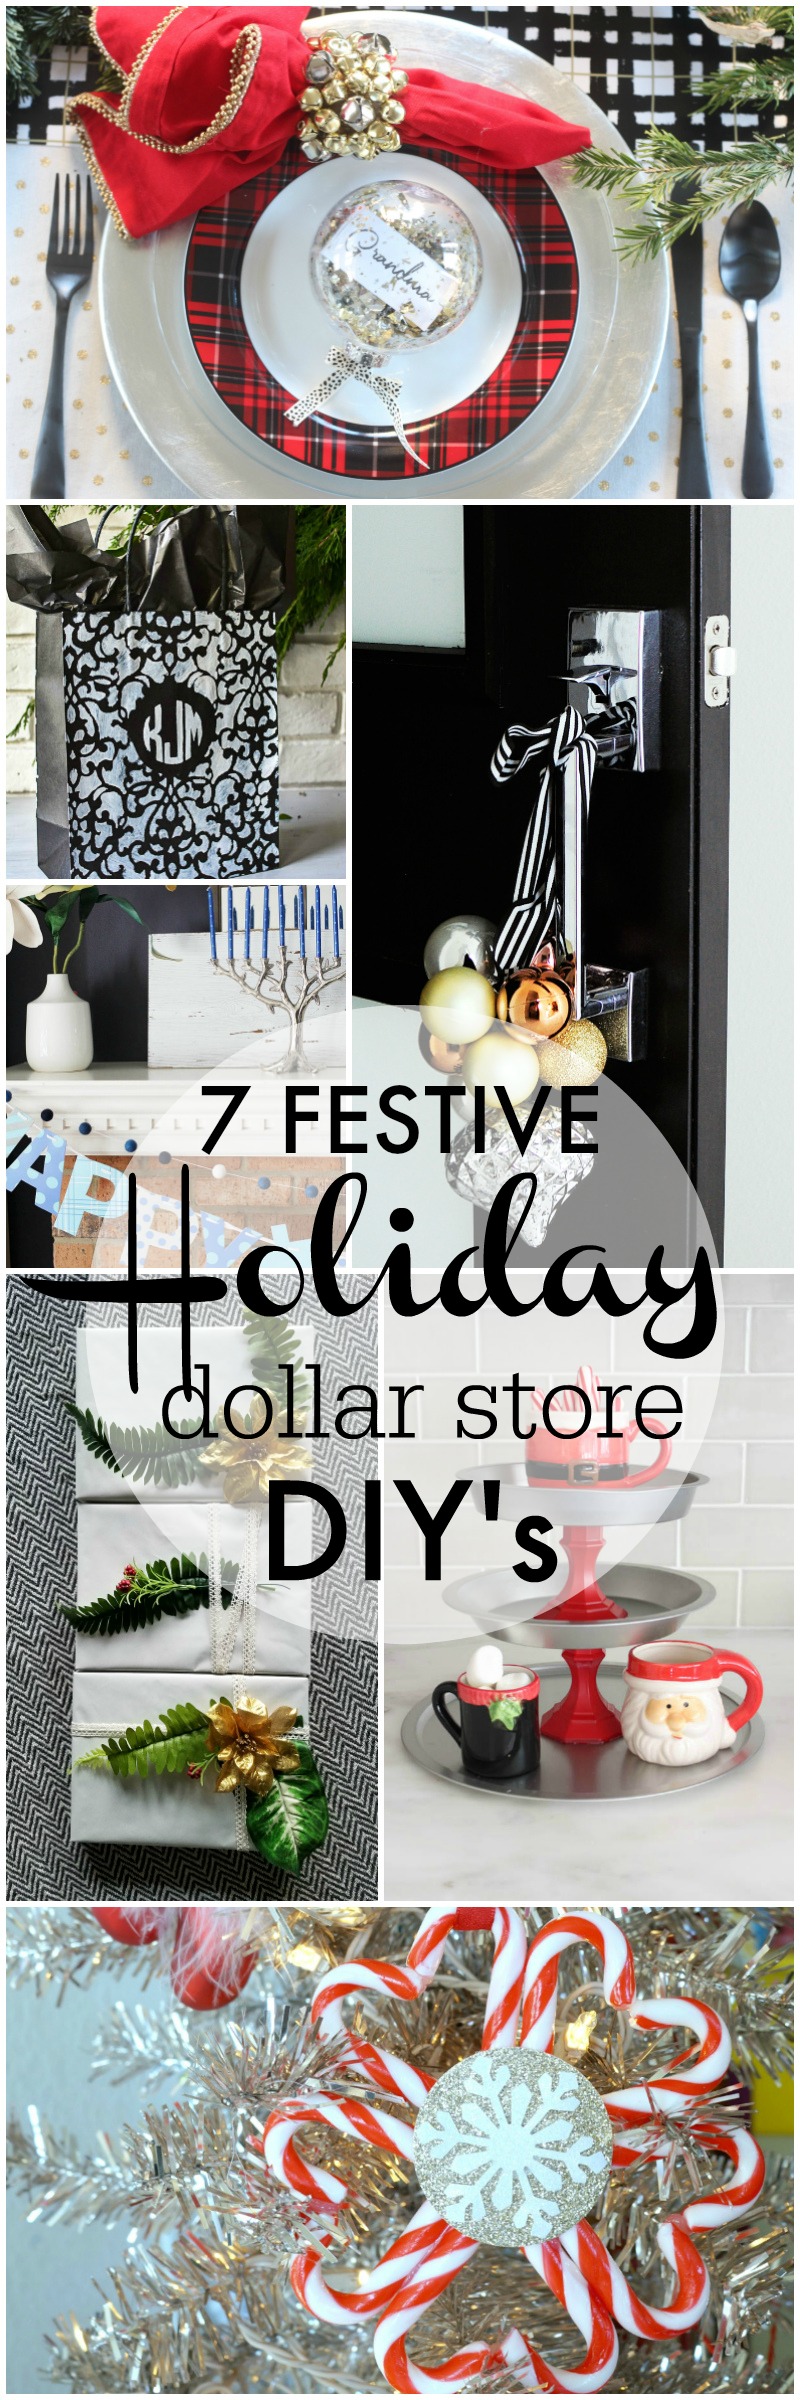 7 Holiday Dollar Store DIY Projects - My Dollar Store DIY Series